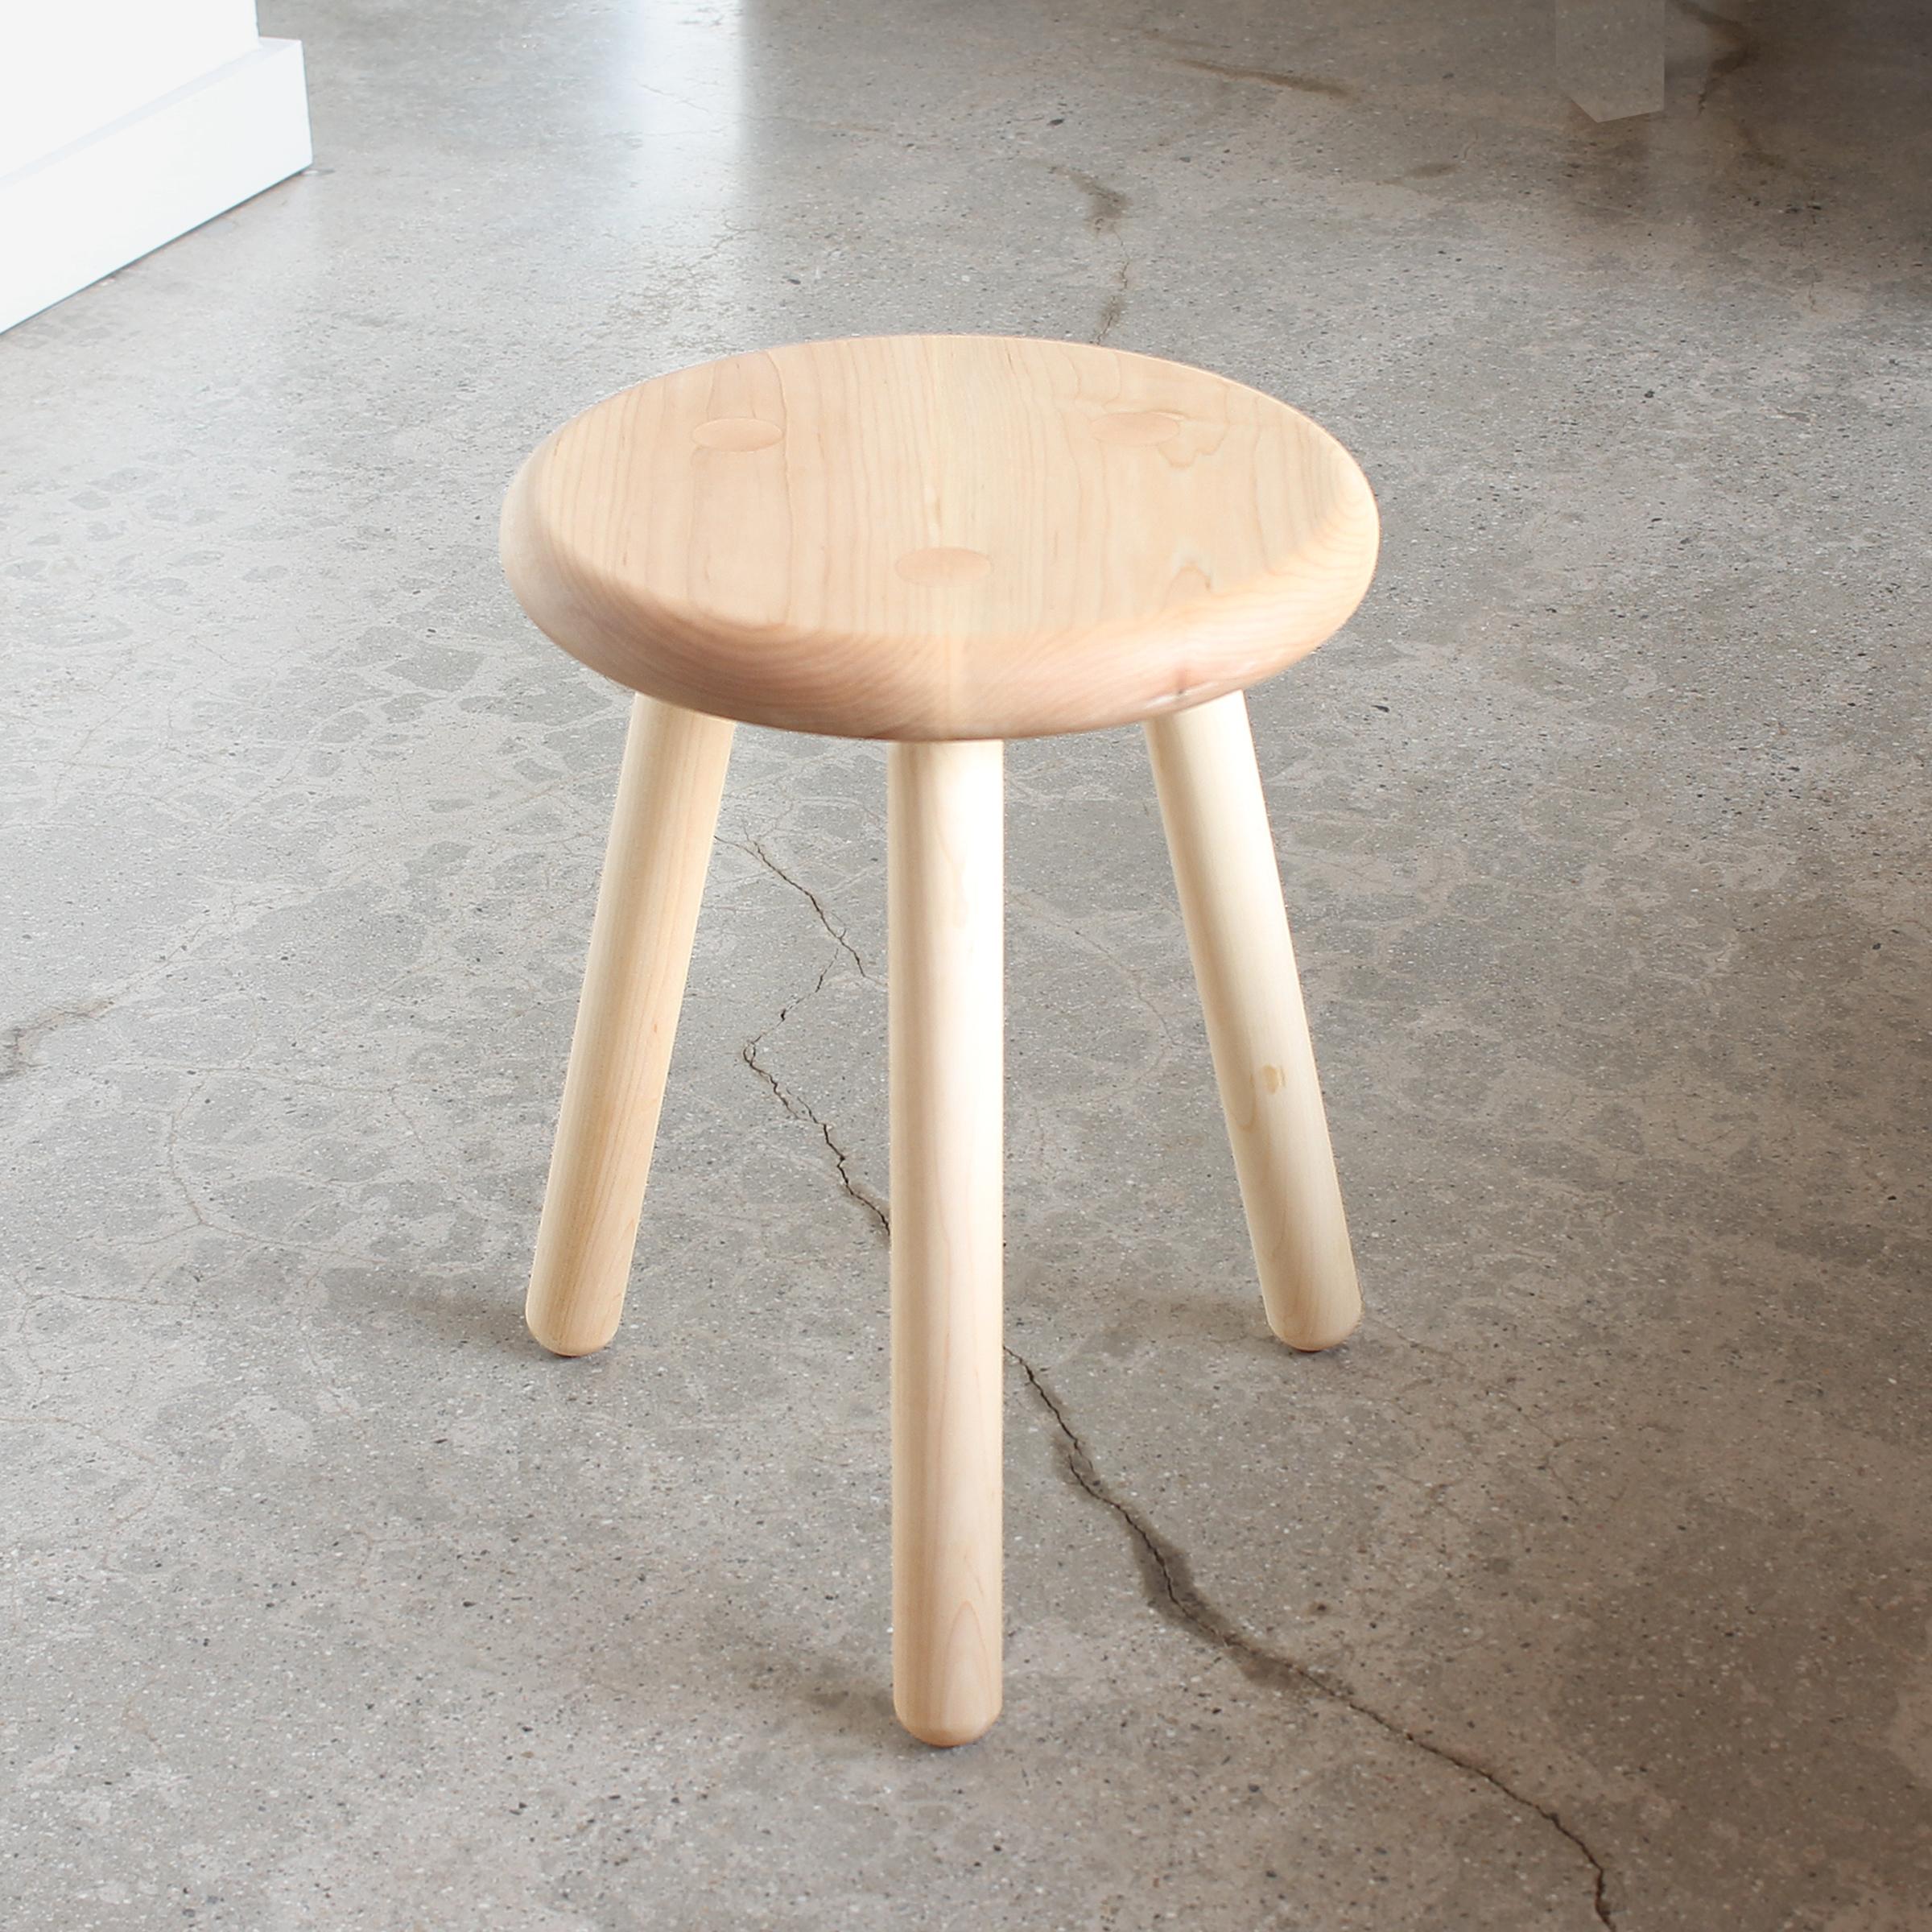 Solid maple 3 leg stool hand crafted in Los Angeles. Turned Legs and seat offer solid, always planted perch for everyday activities such as meditation or just putting on shoes. Legs mortised through seat and display the handcrafted joinery. Finished